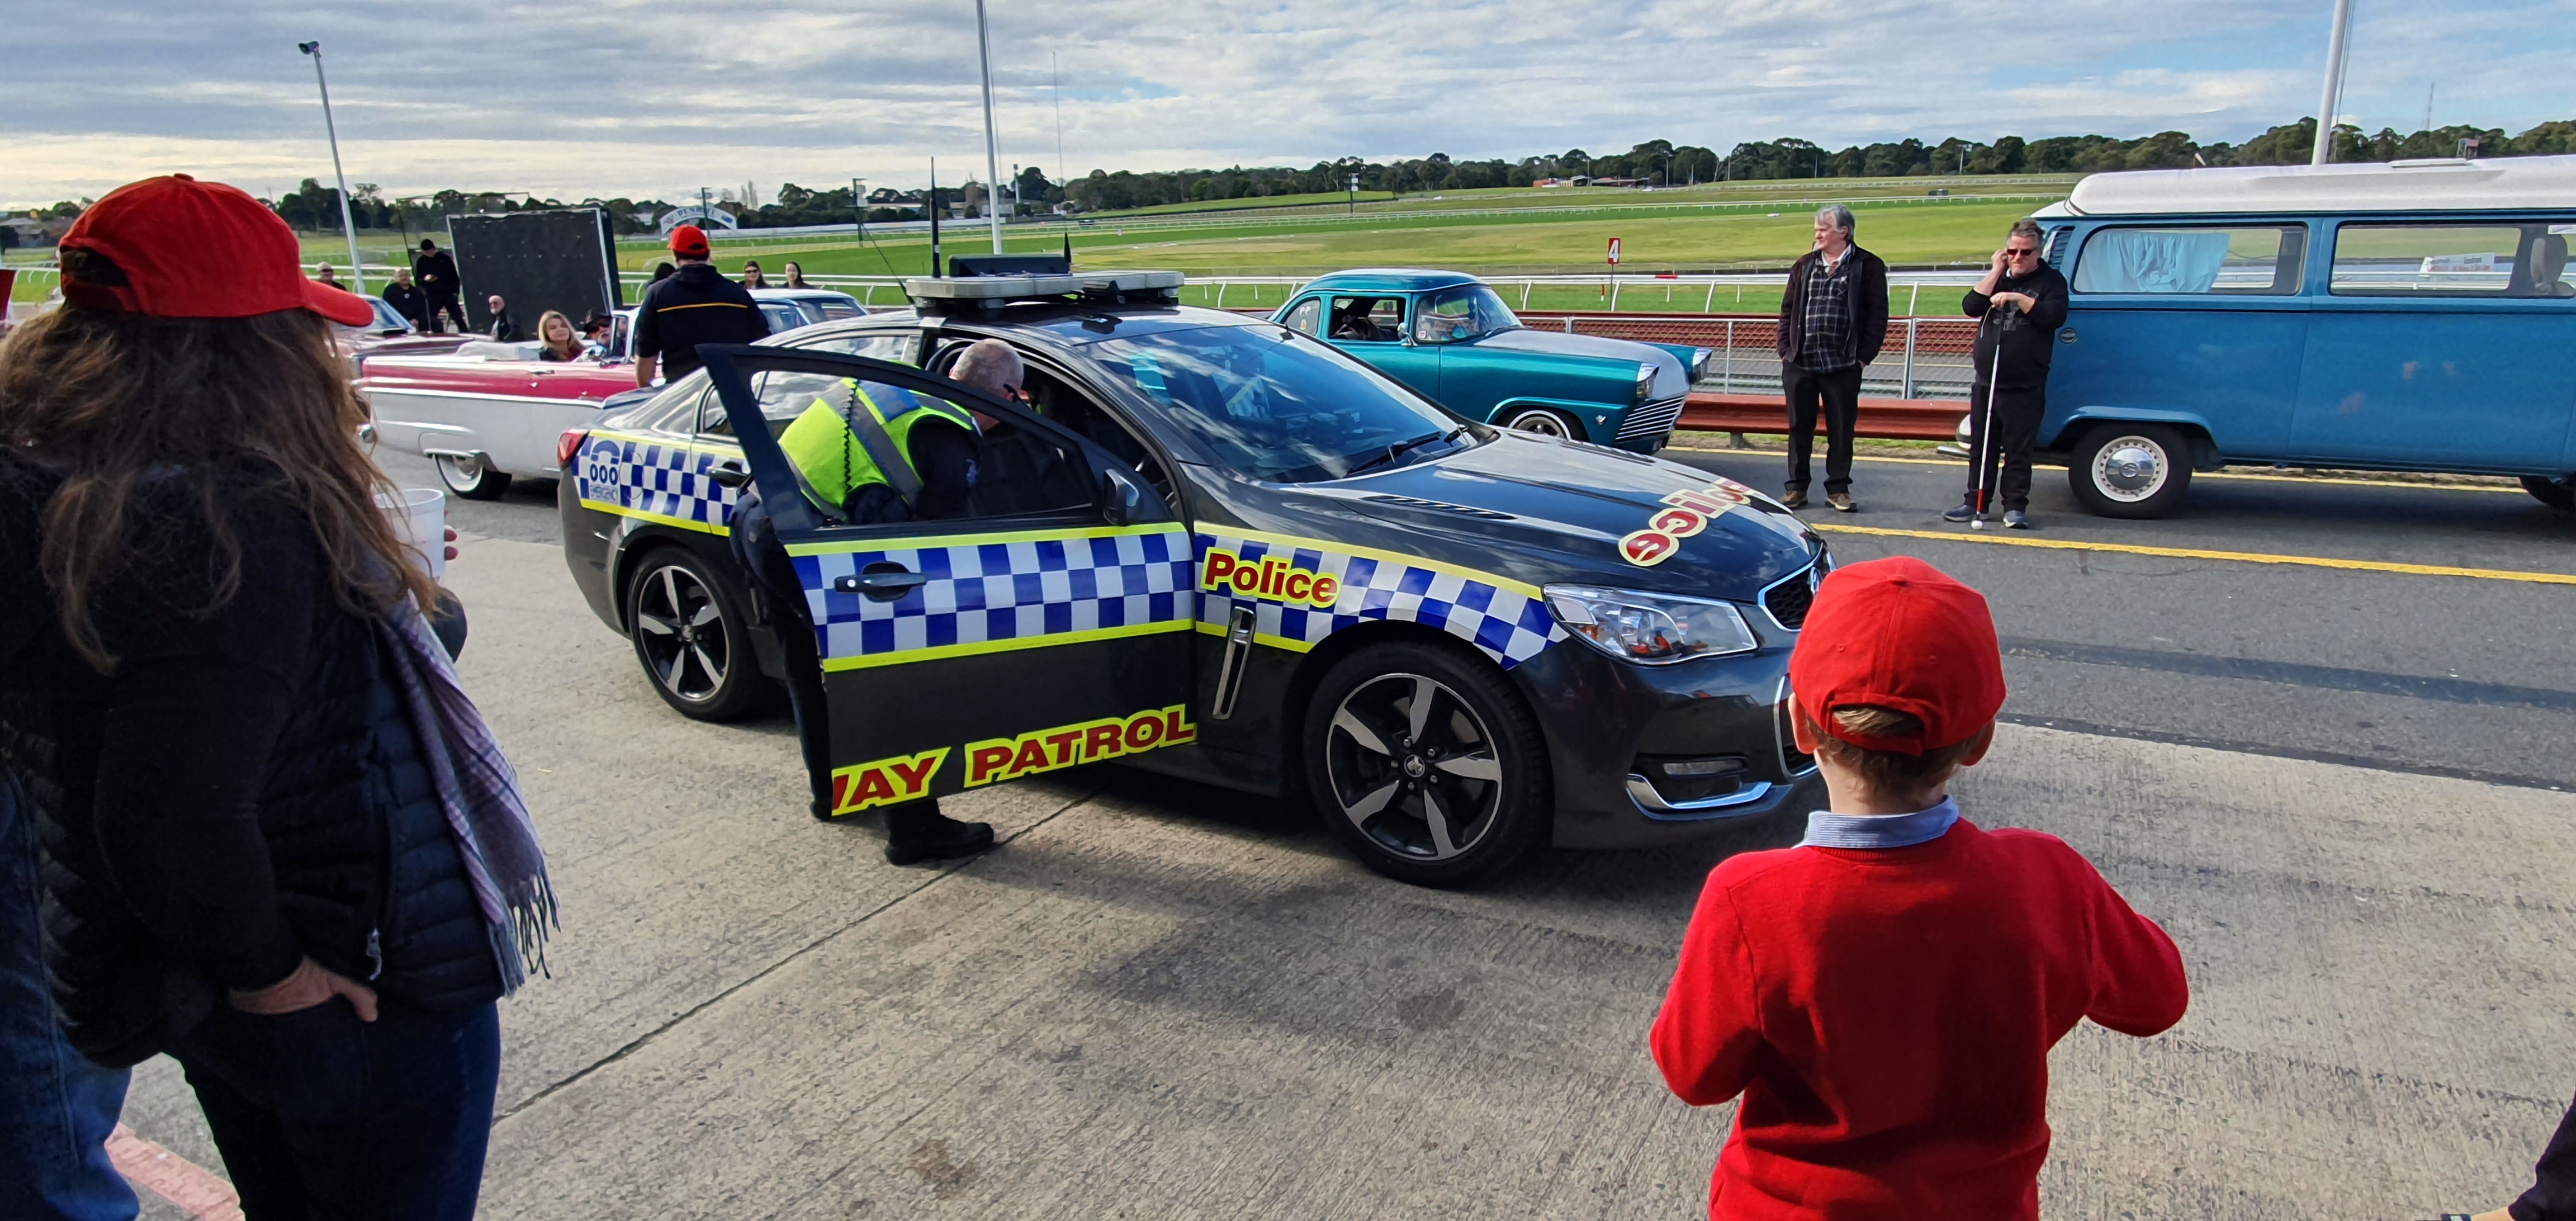 "A police car on the Sandown Racecourse with a police officer looking into the car."